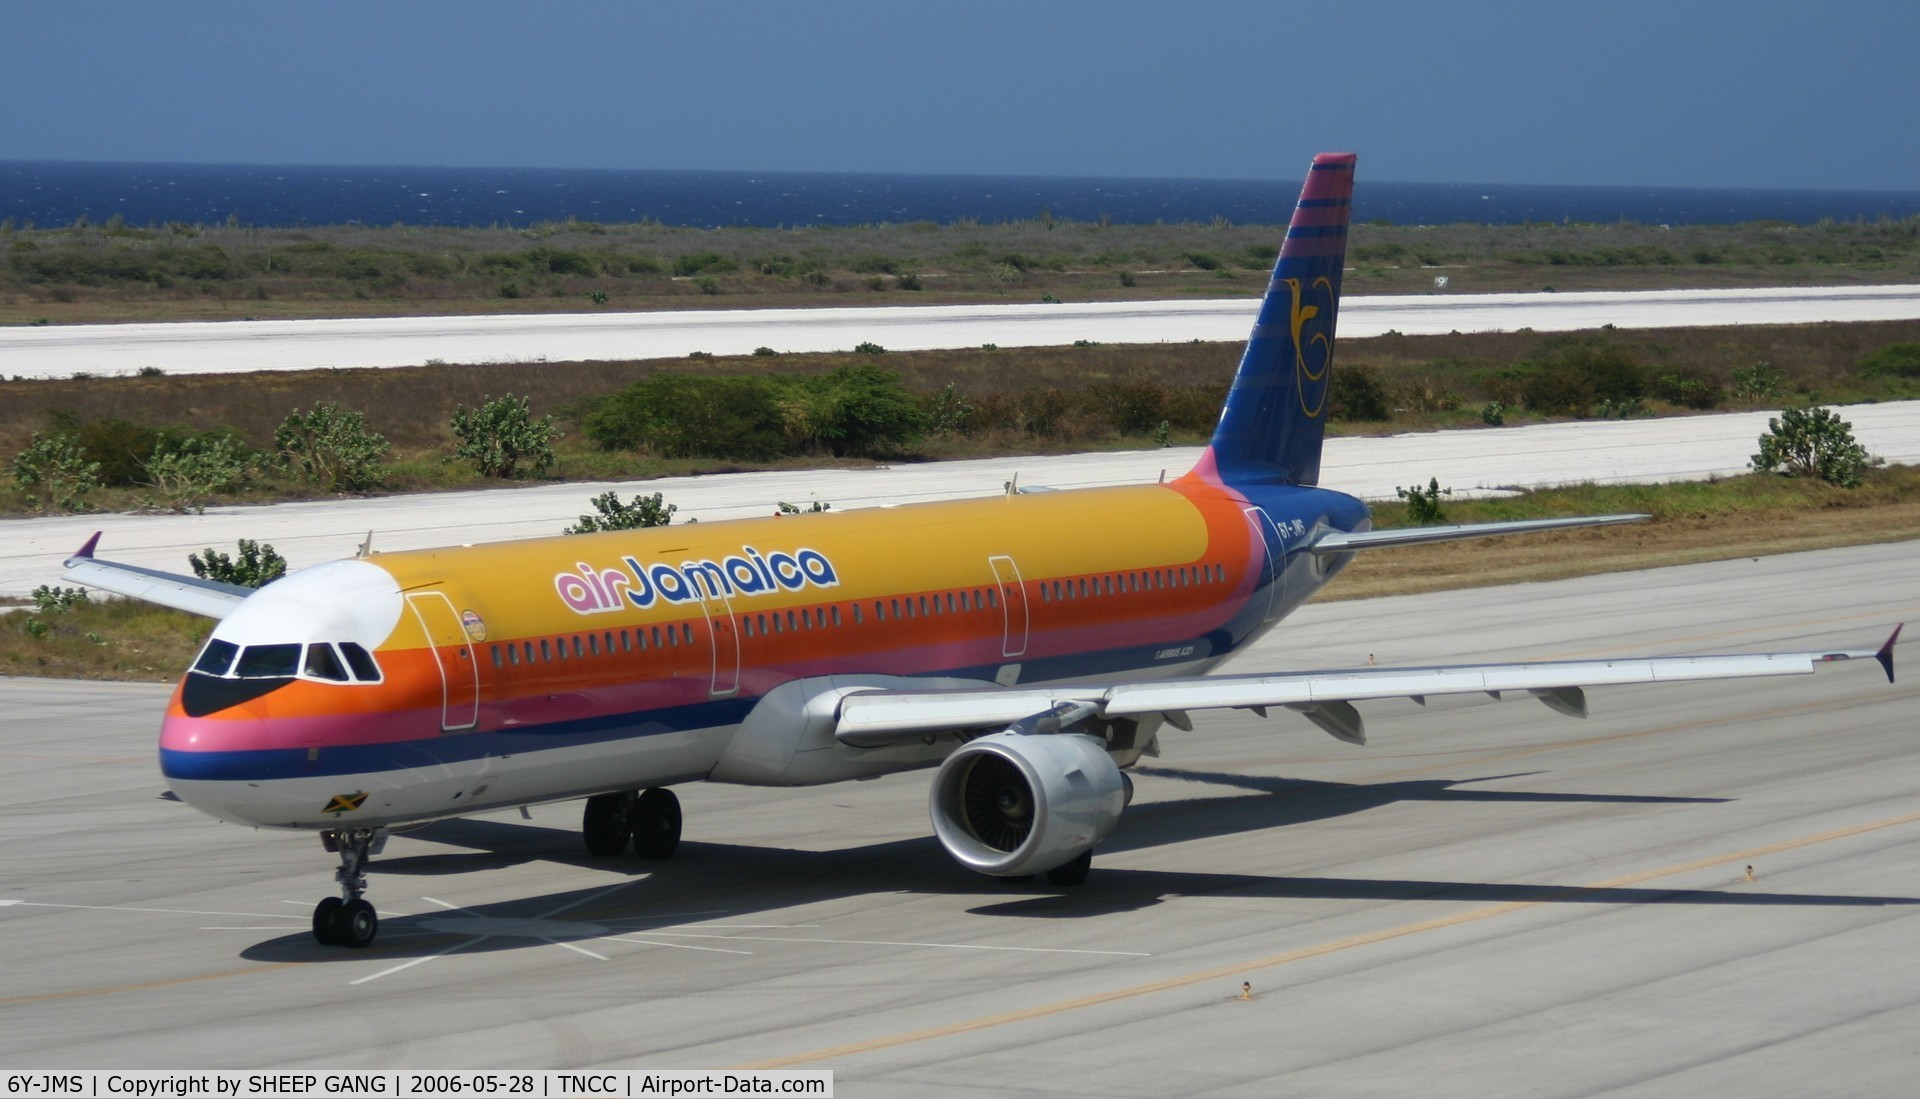 6Y-JMS, 2003 Airbus A321-211 C/N 1966, Taxing to take off